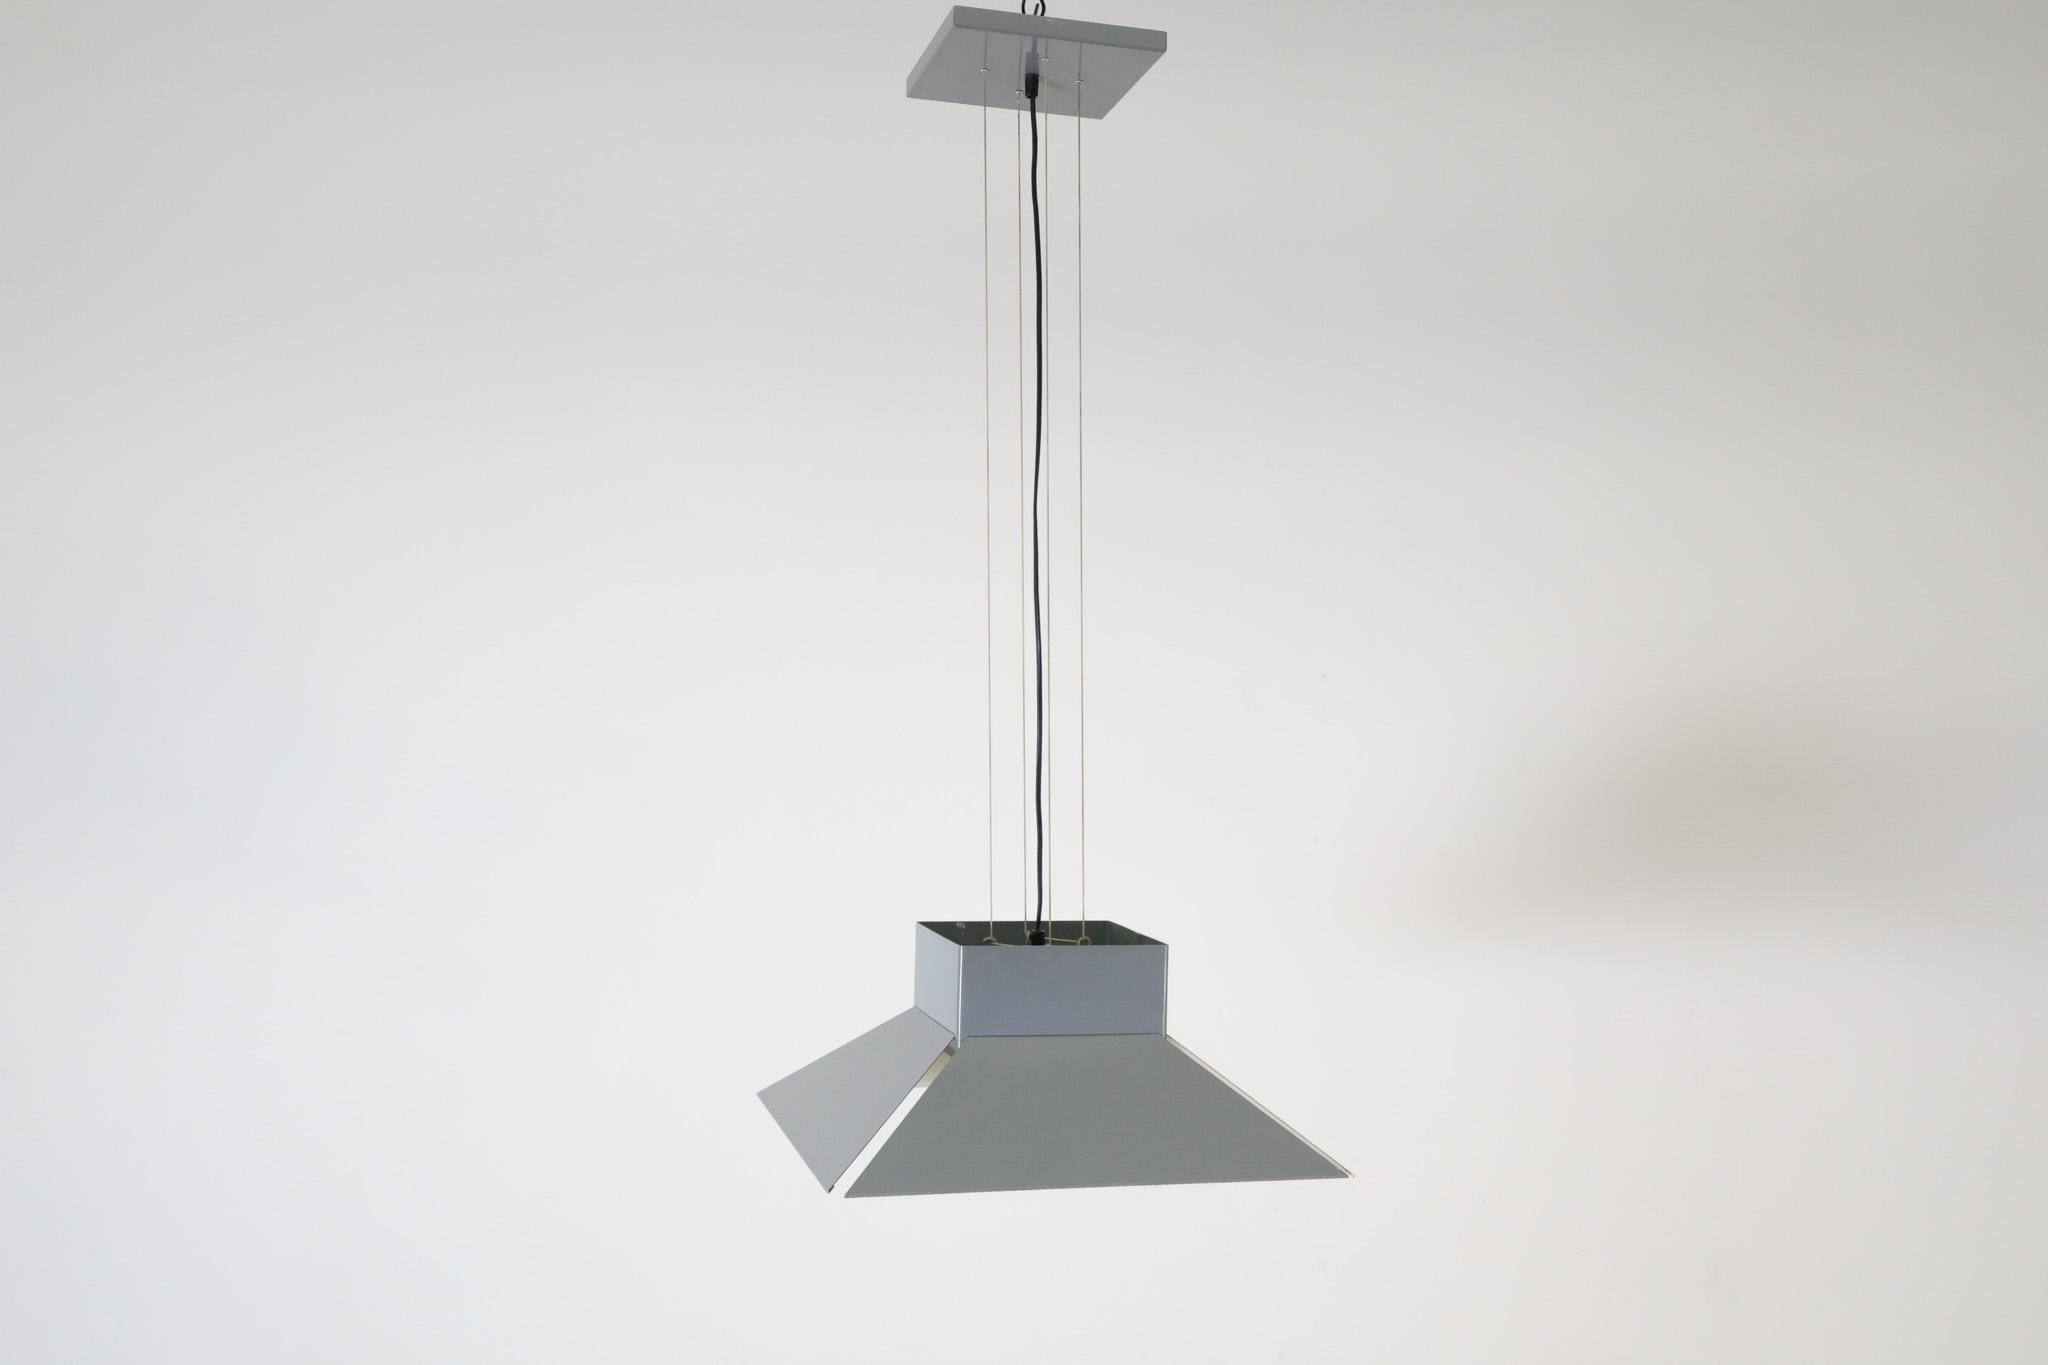 This striking. Mid-Century ceiling pendant was designed by Dutch manufacturer Artimeta in the 1970s. It's a sleek, minimalist light fixture that adds flair to any room. The pendant is made of gray enameled metal and has a black wire cord,